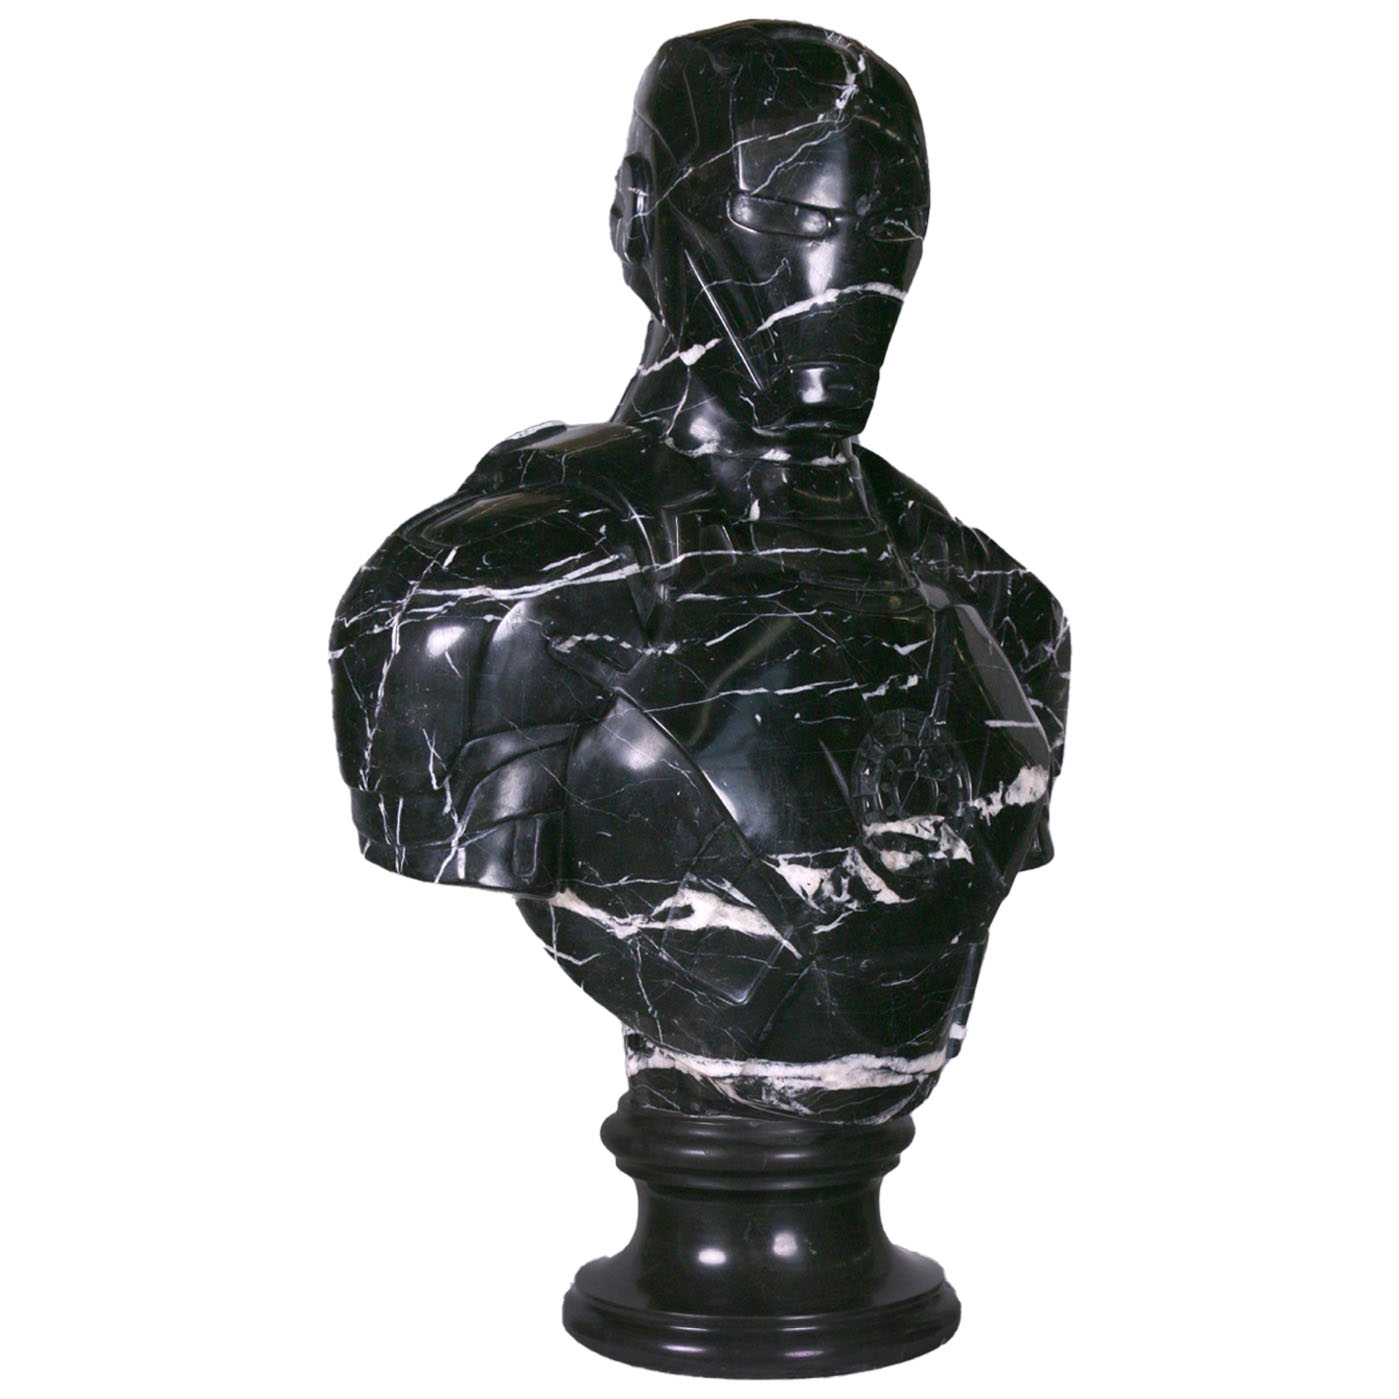 Picture of a black Portorro marble sculpture of Batman, by French artist Léo Caillard, represented at Galerie Montmartre, Paris, France